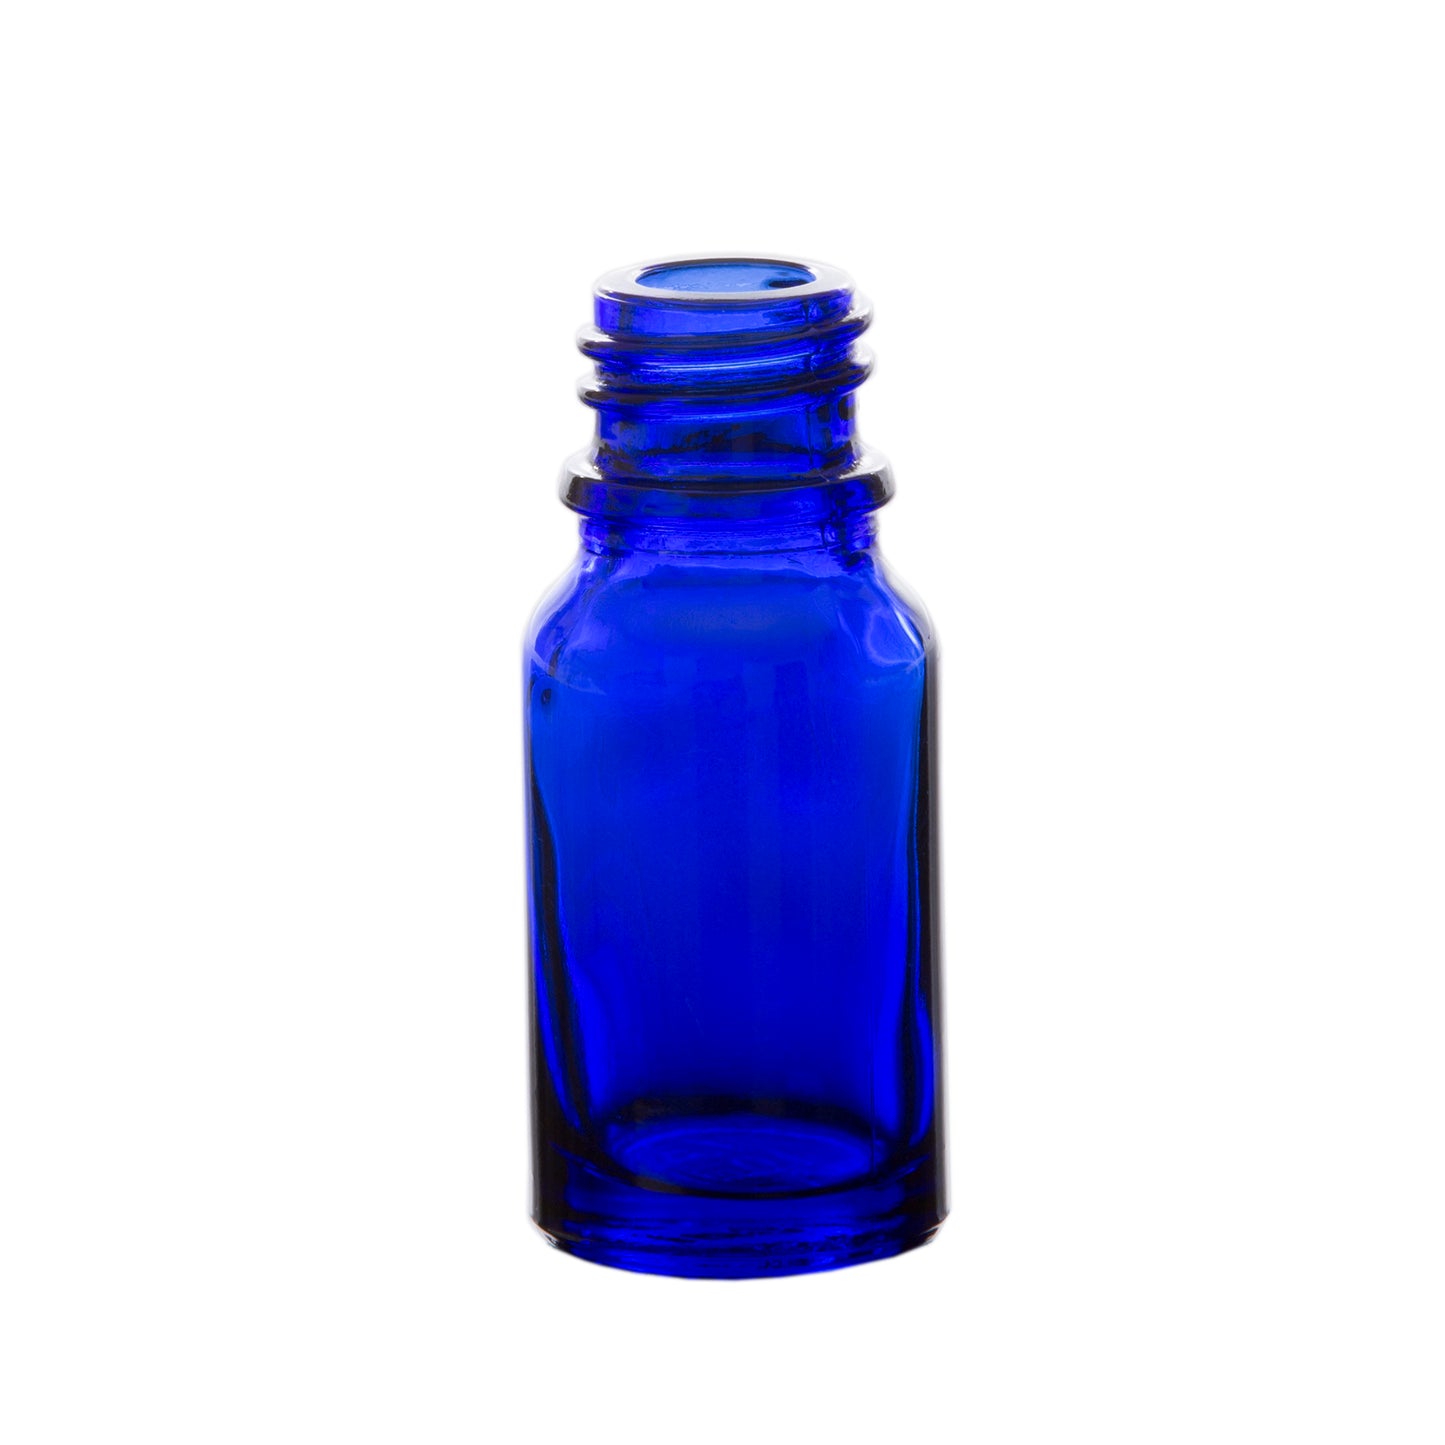 10 ml Blue Glass Essential Oil Bottle without Cap